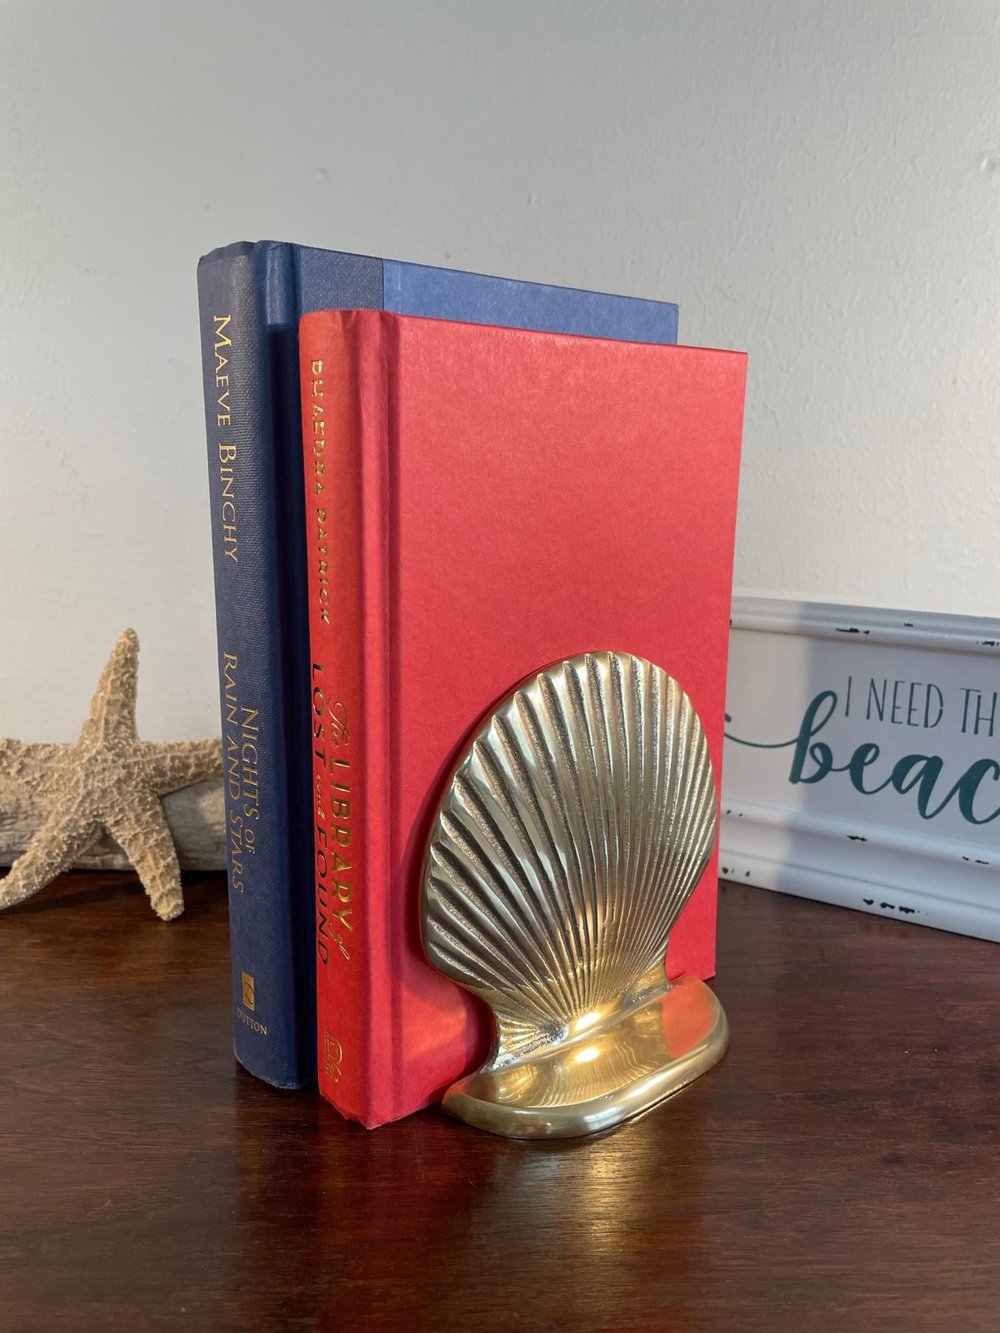 Late 20th Century Nautical Solid Brass Seashell Bookends - a Pair